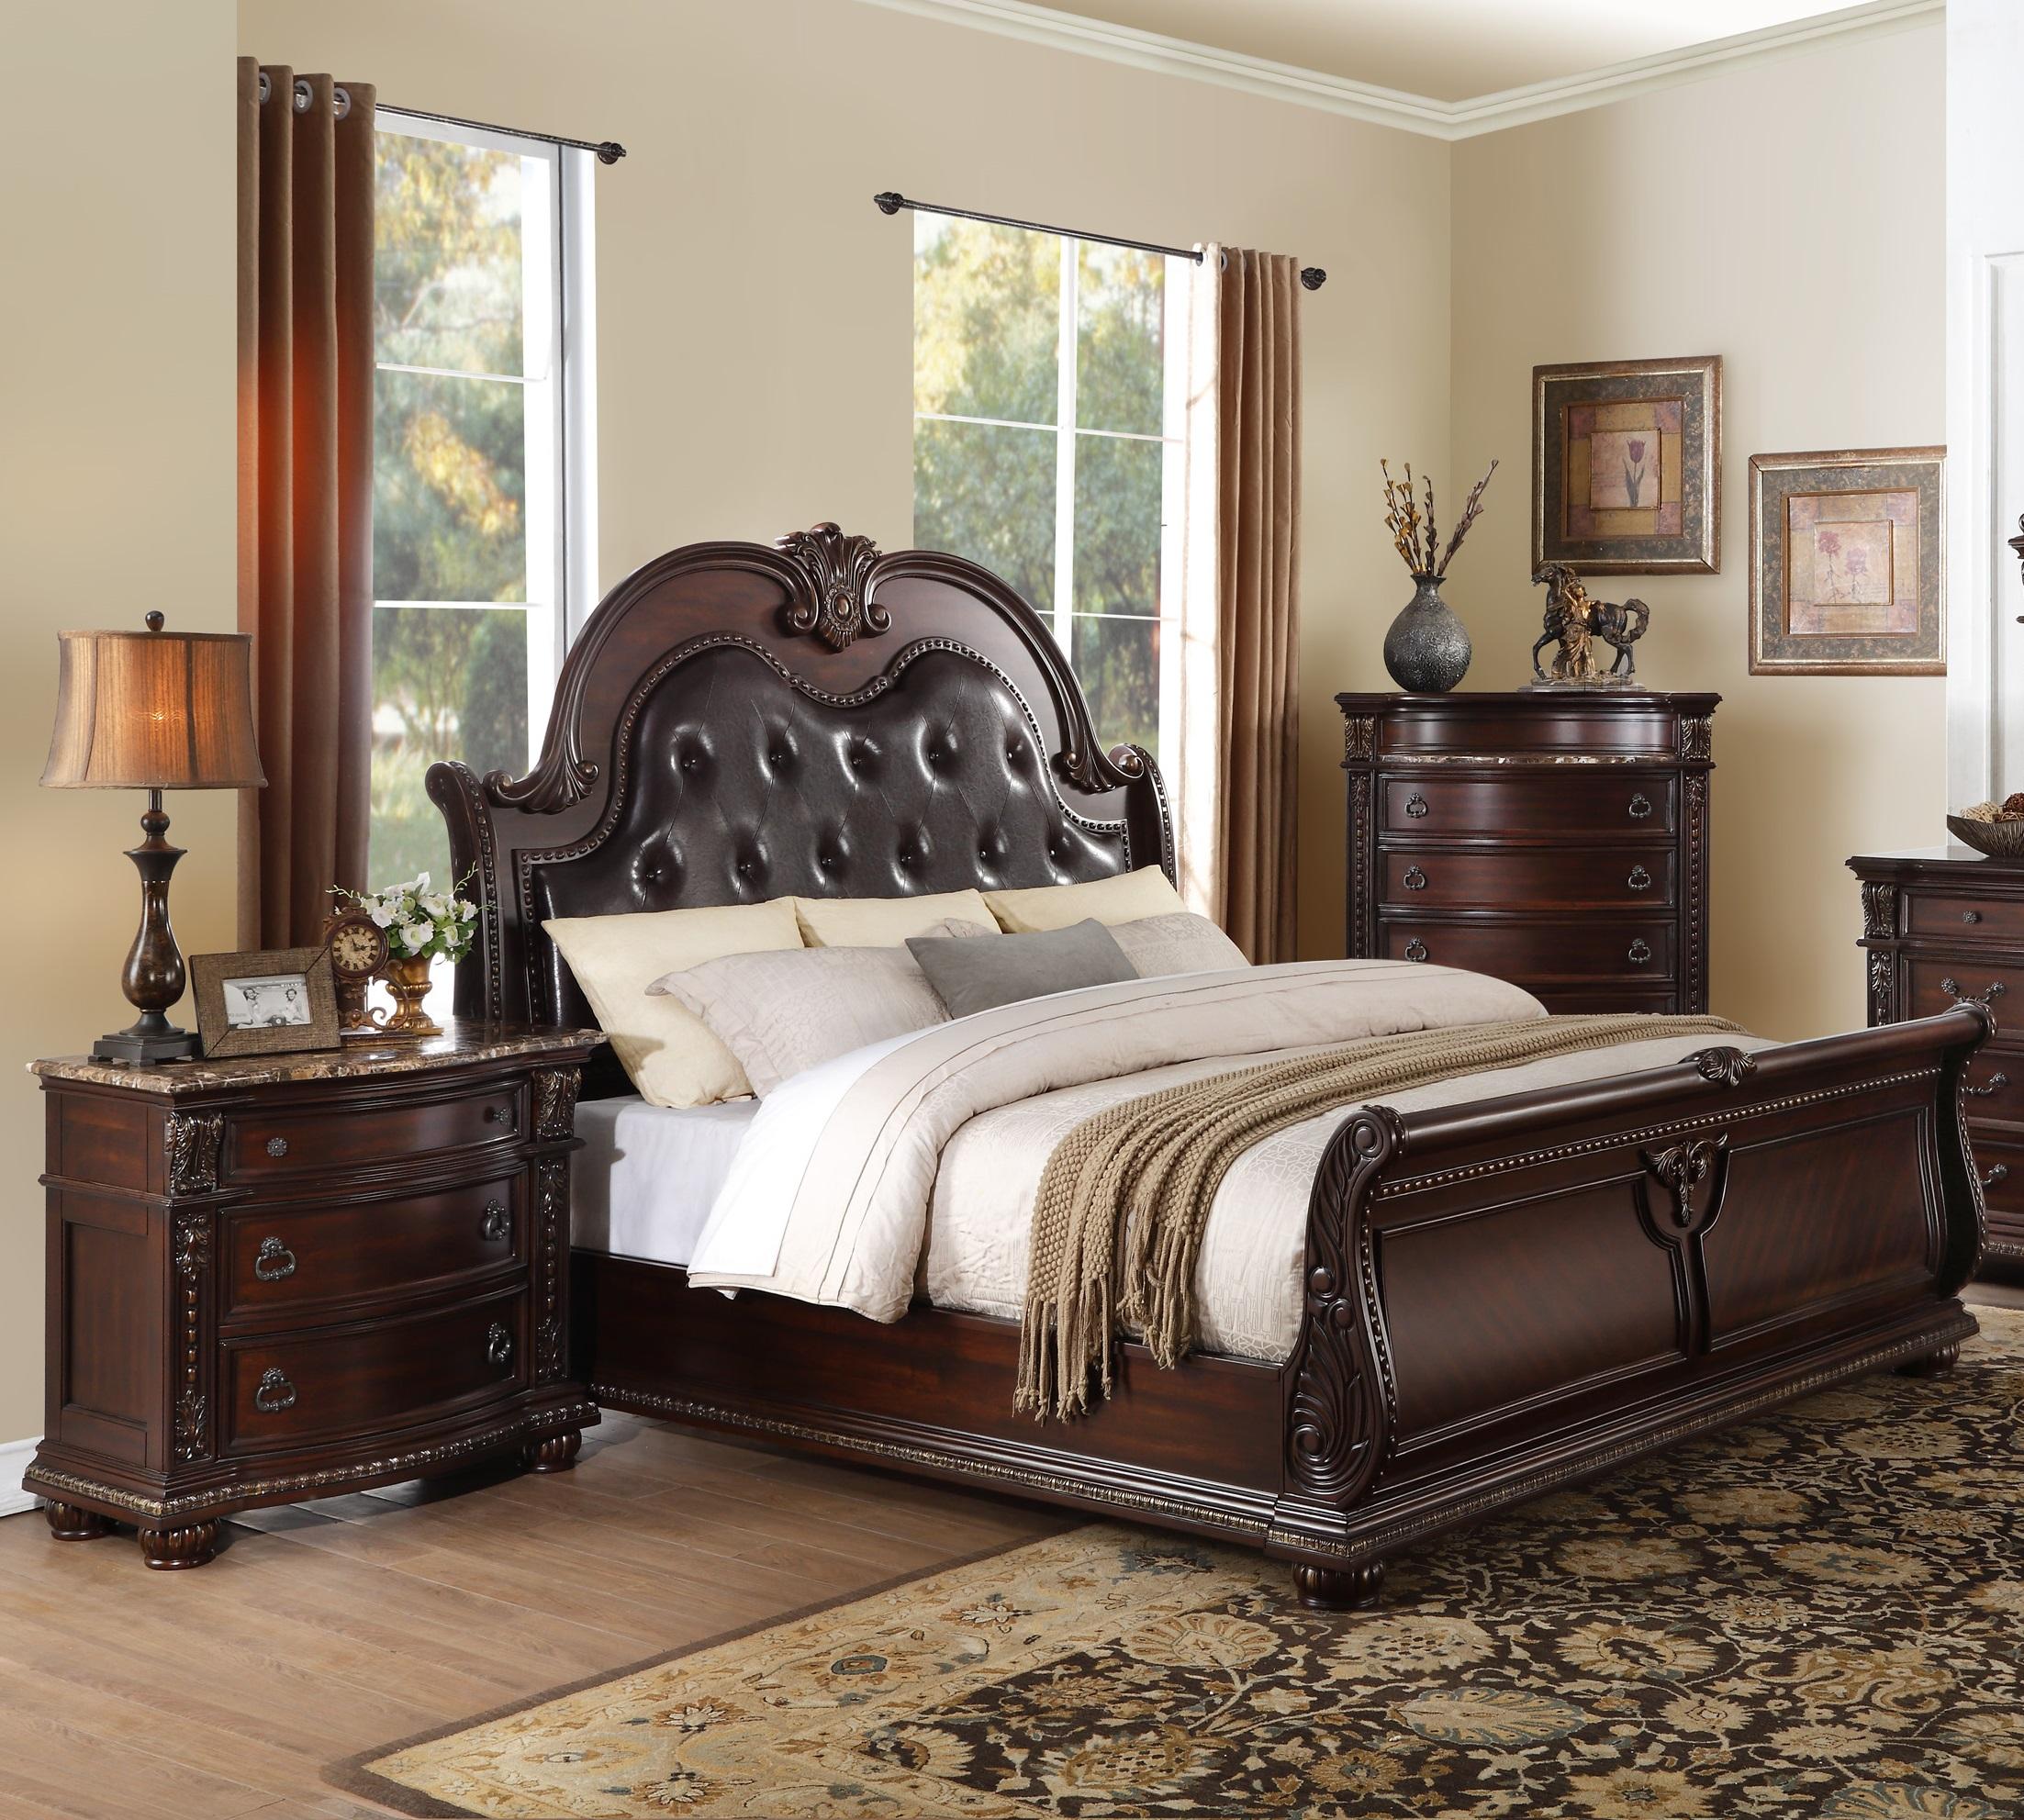 Classic Bedroom Set 1757-1-3PC Cavalier 1757-1-3PC in Dark Cherry Faux Leather